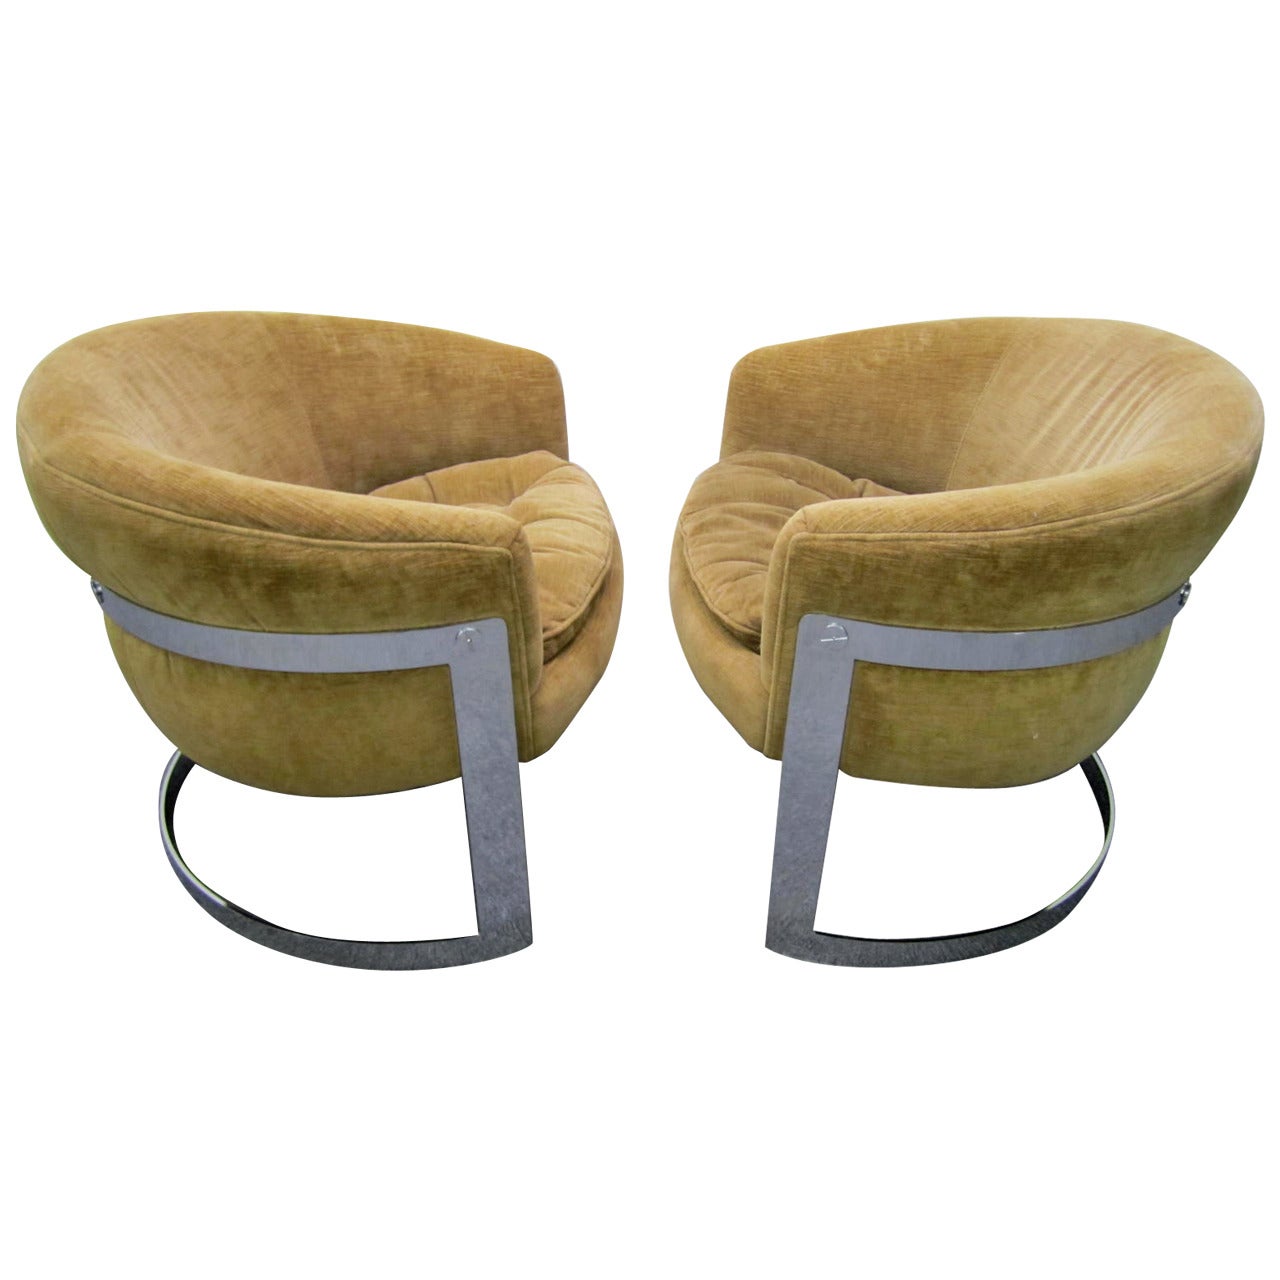 Pair of Barrel Back Chrome Lounge Chairs, Mid-Century Modern